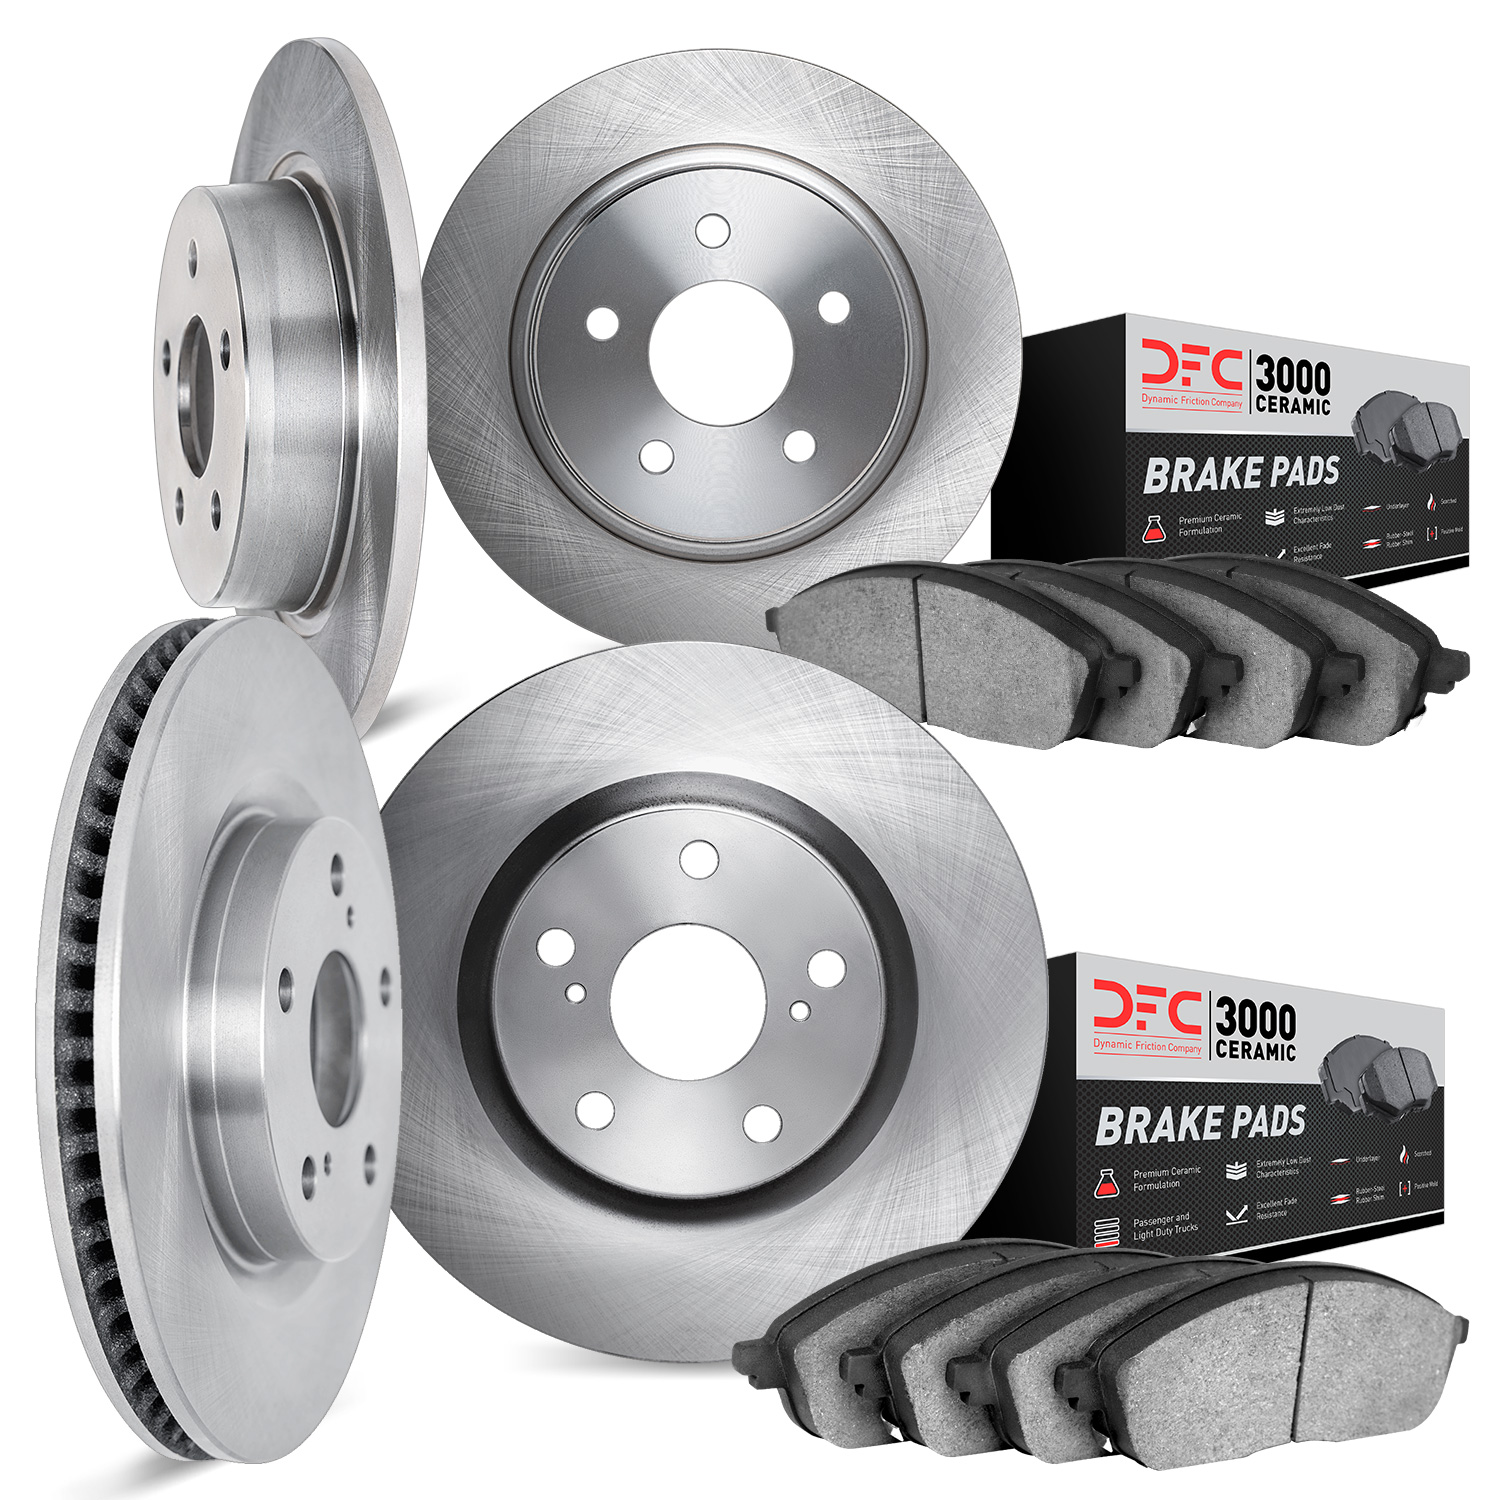 6304-59089 Brake Rotors with 3000-Series Ceramic Brake Pads Kit, Fits Select Acura/Honda, Position: Front and Rear